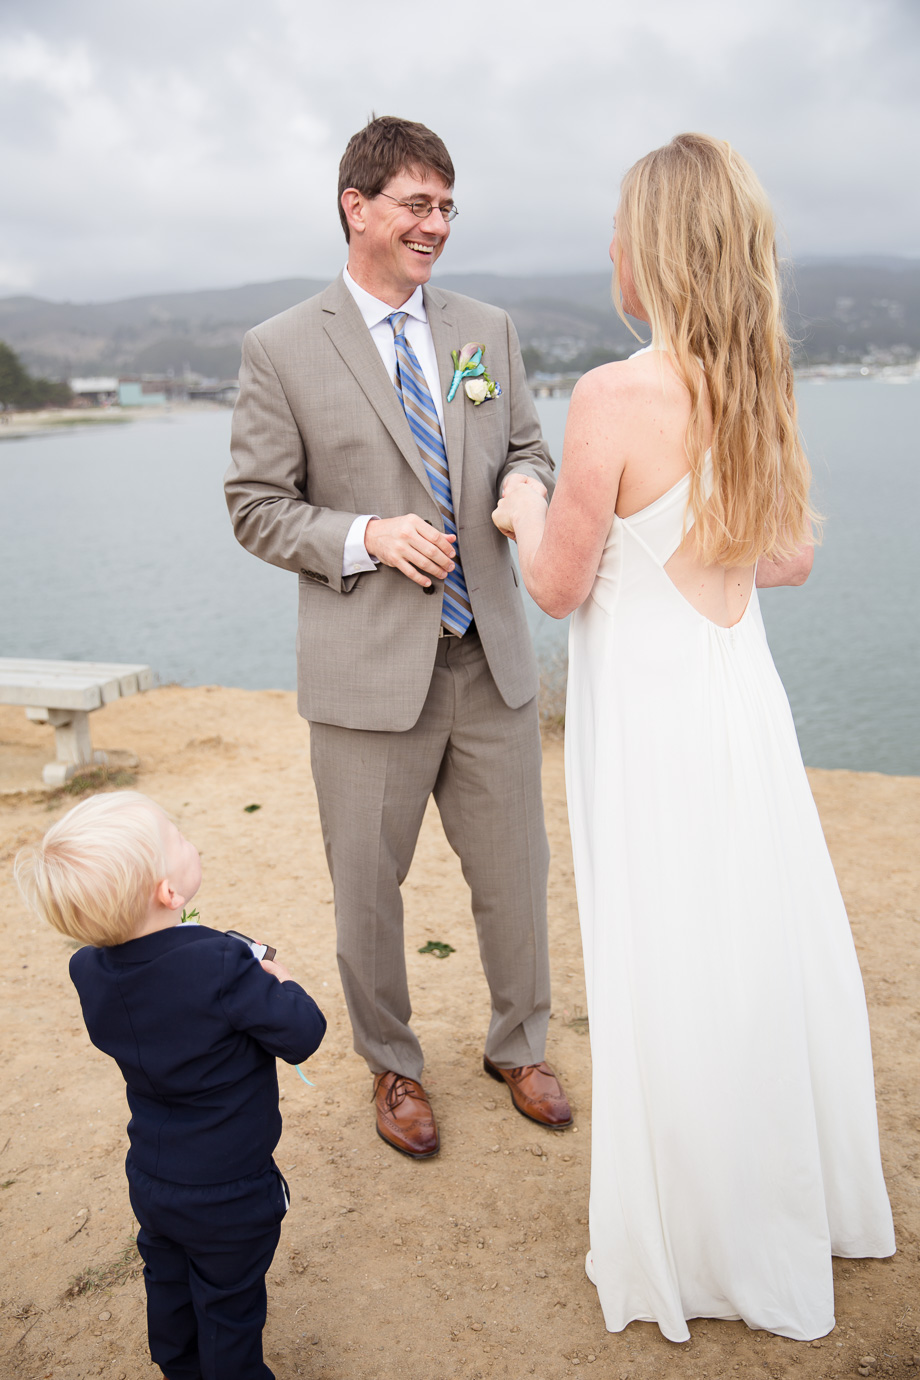 Cute moment - the cute little ring bearer wouldn